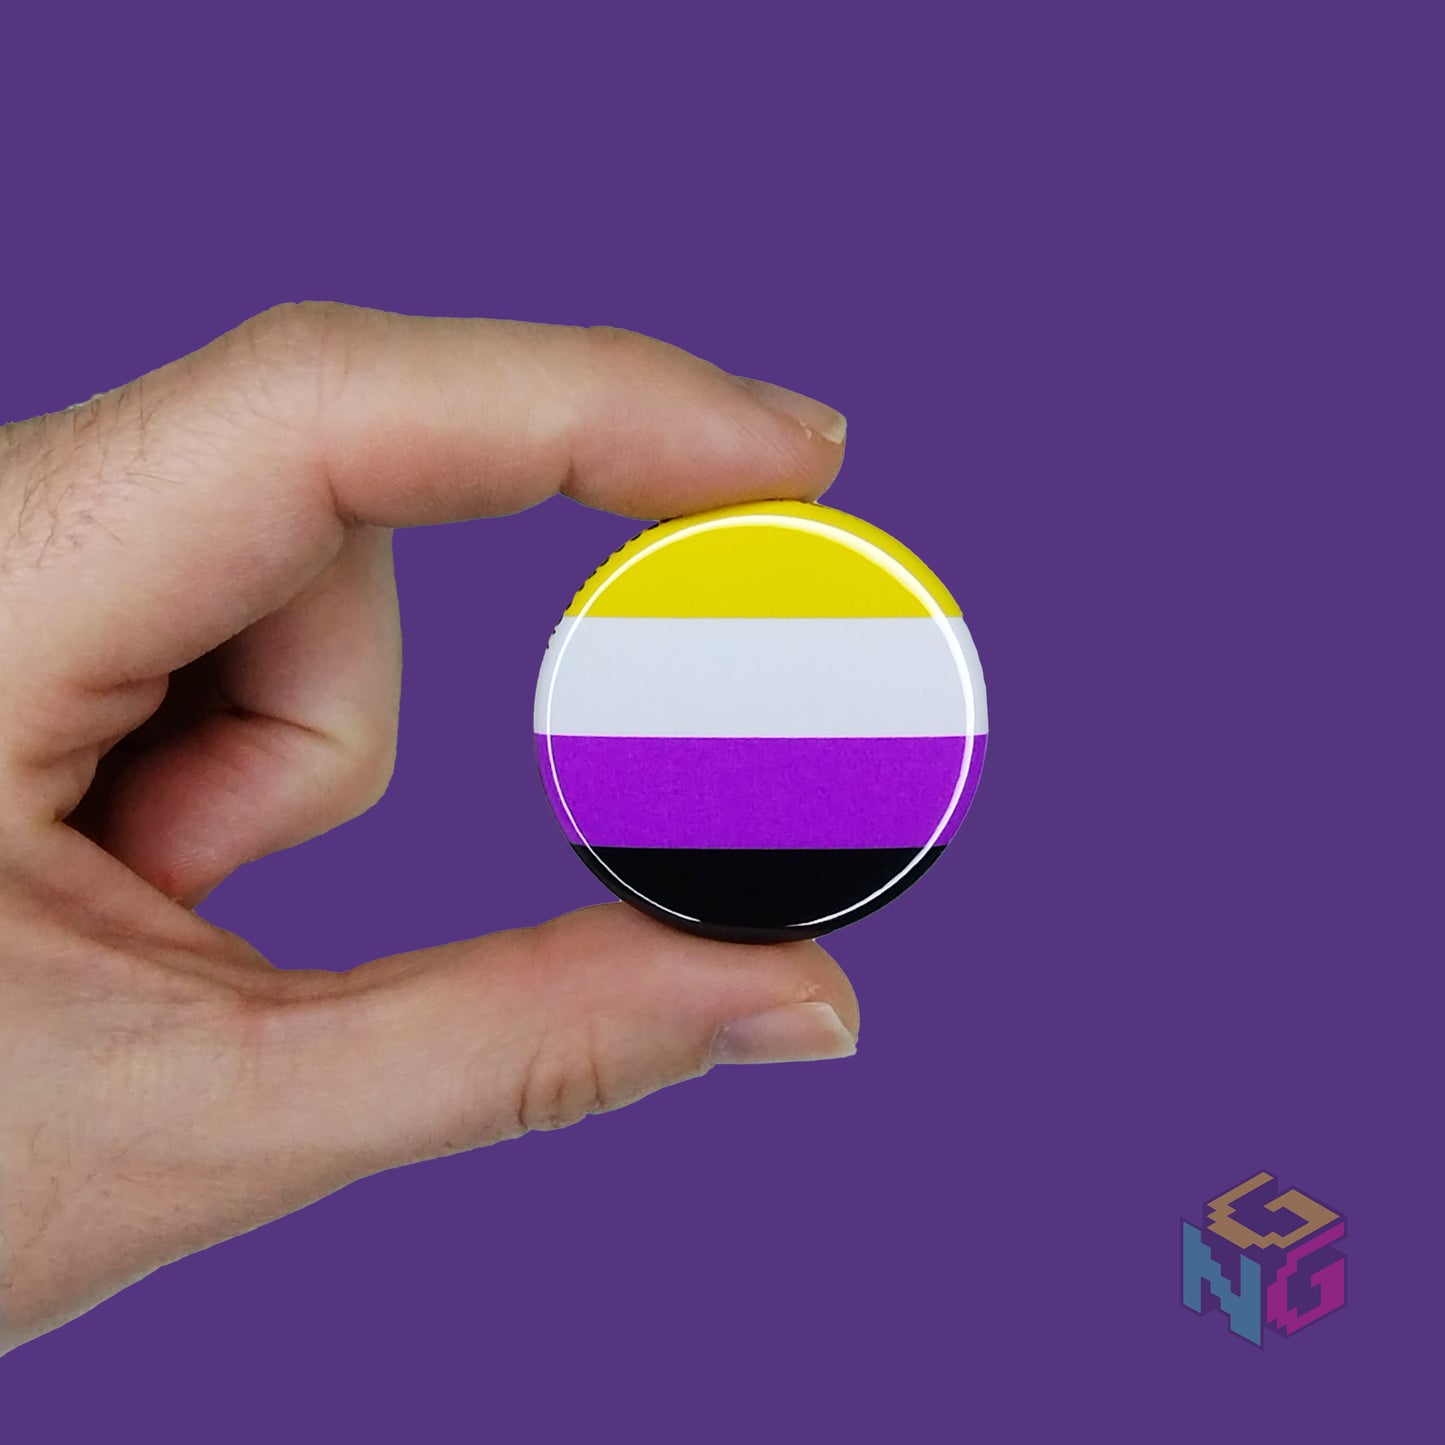 nonbinary pride pin held in a hand held in front of a purple background